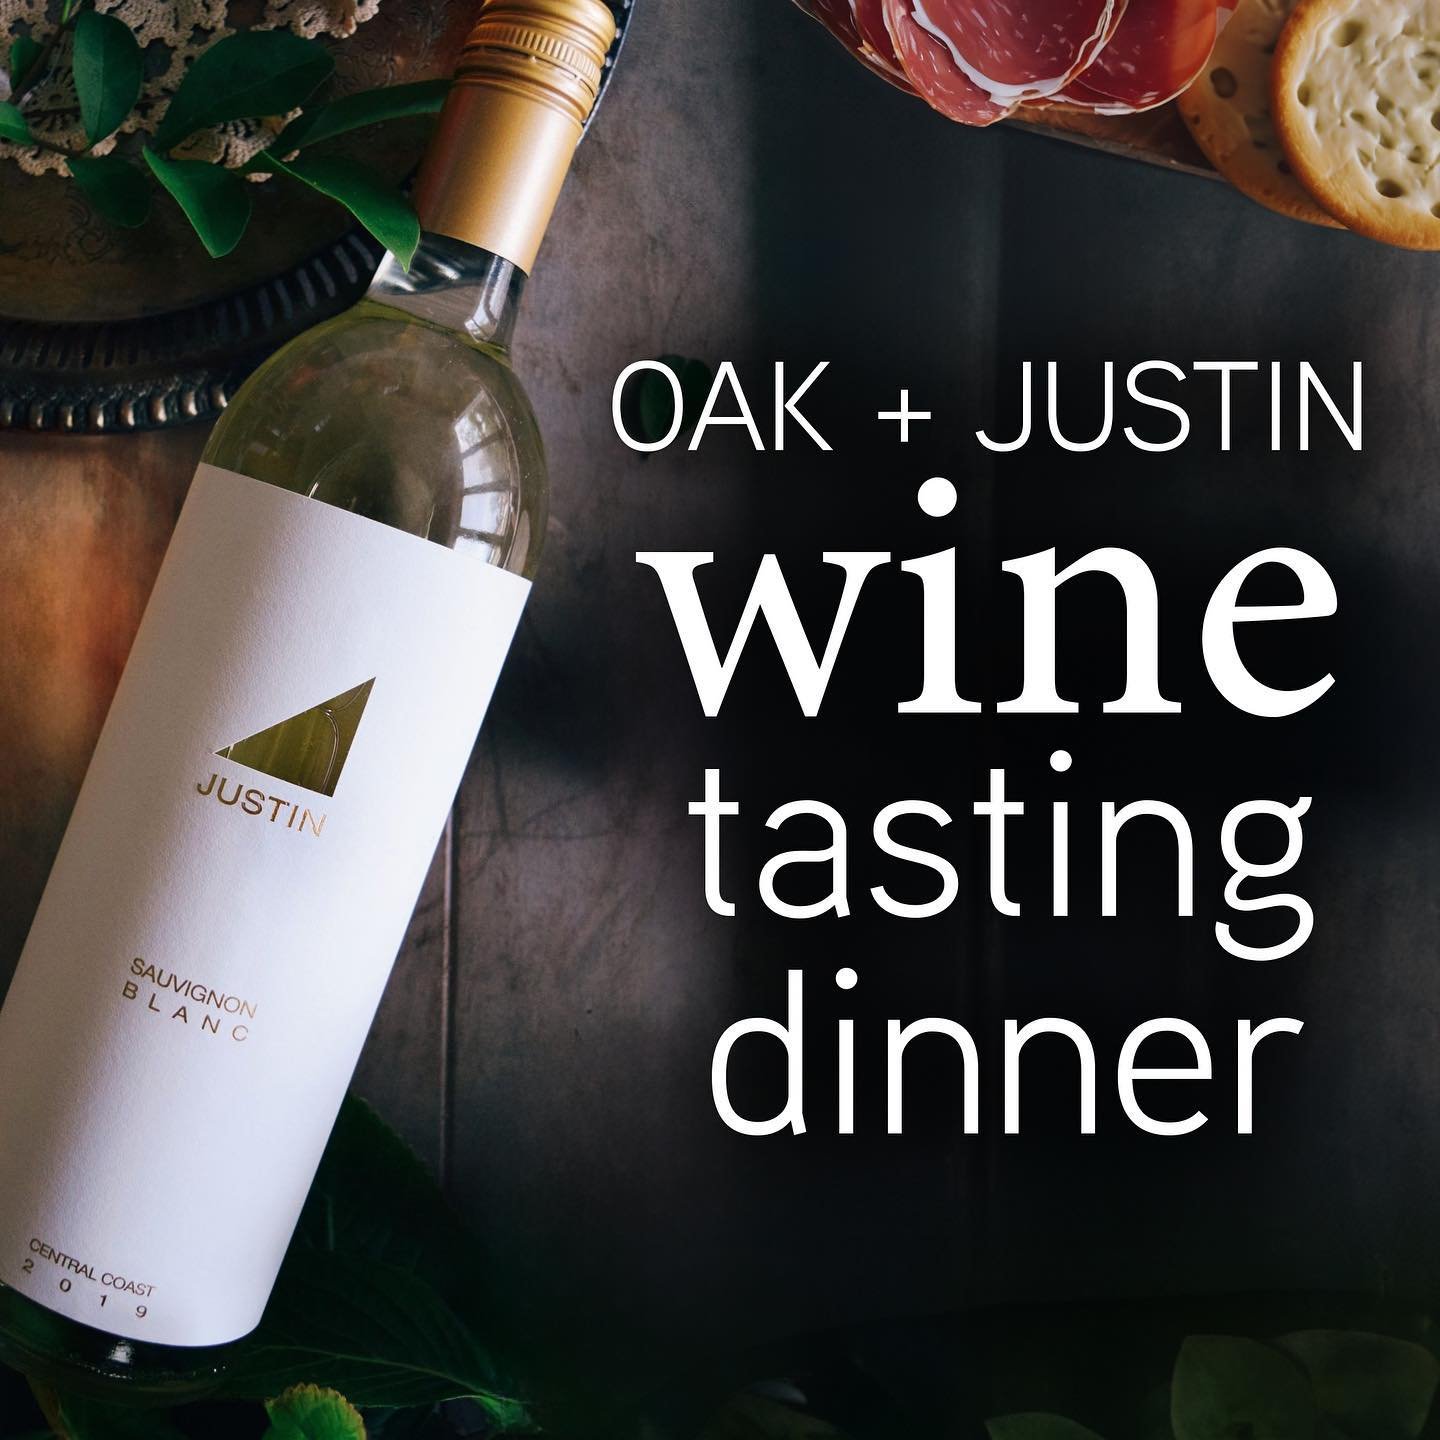 THE MOMENT YOU&rsquo;VE BEEN WAITING FOR!
Announcing the menu and wine pairings for our 5-Course @justinwine Tasting Dinner! Swipe picture for details!

WEDNESDAY, MAY 15 from 6pm-10pm!

DON&rsquo;T MISS OUT! THIS EXCLUSIVE EVENT WILL SELL OUT!
Call 